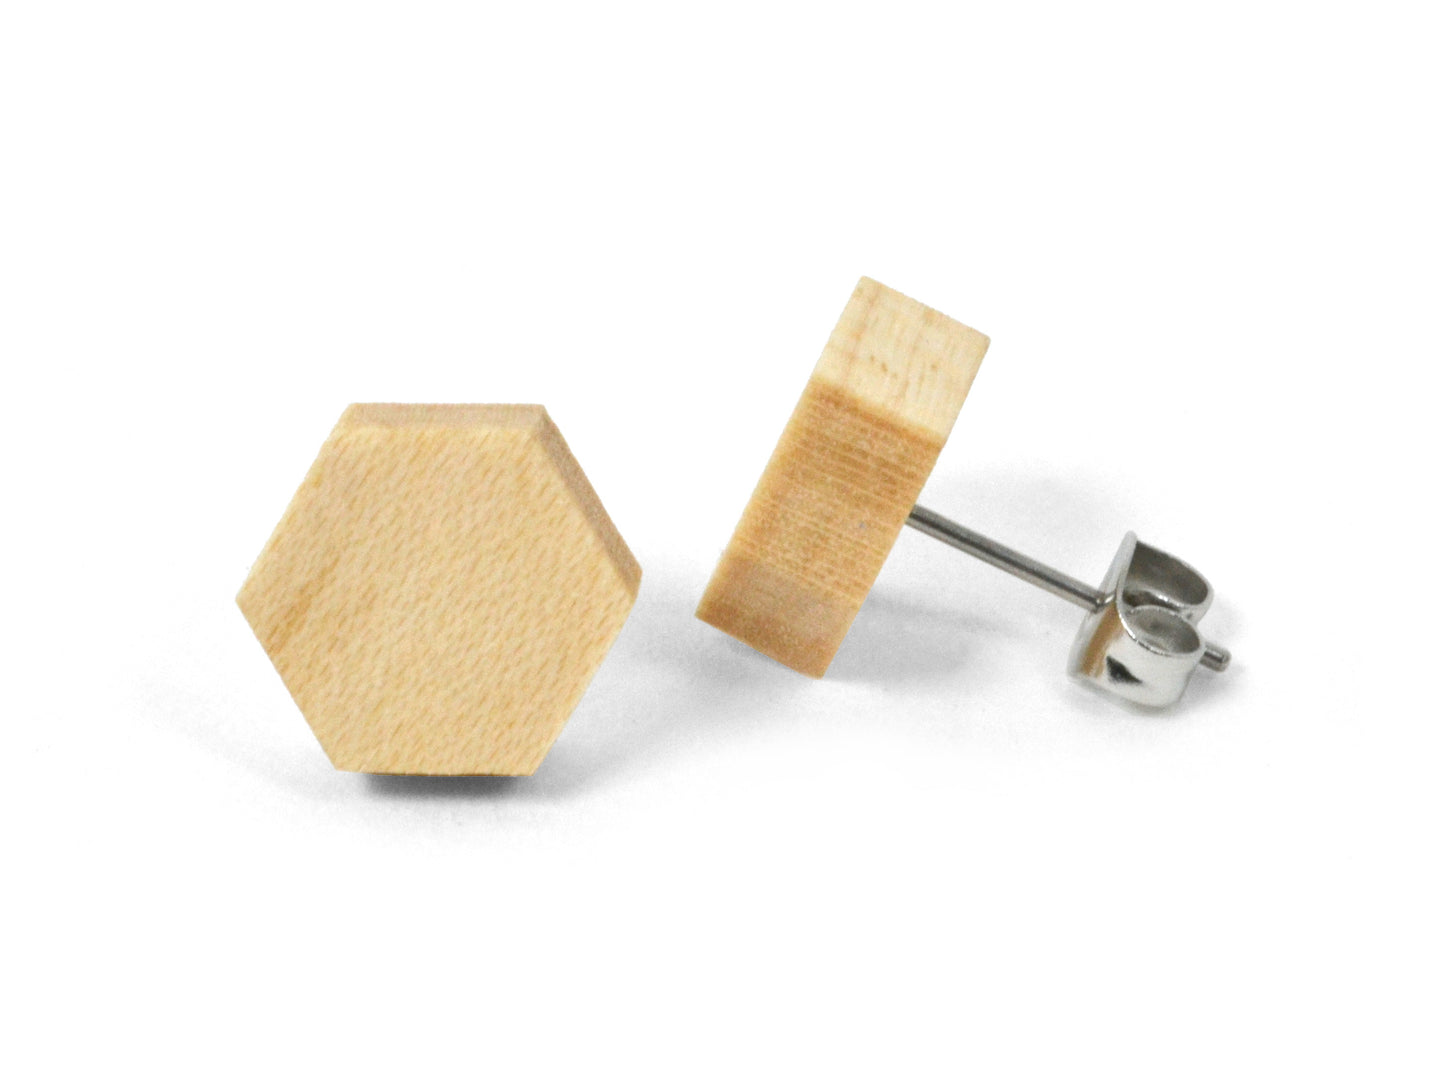 white maple hexagon shaped stud earrings with nickel free stainless steel posts